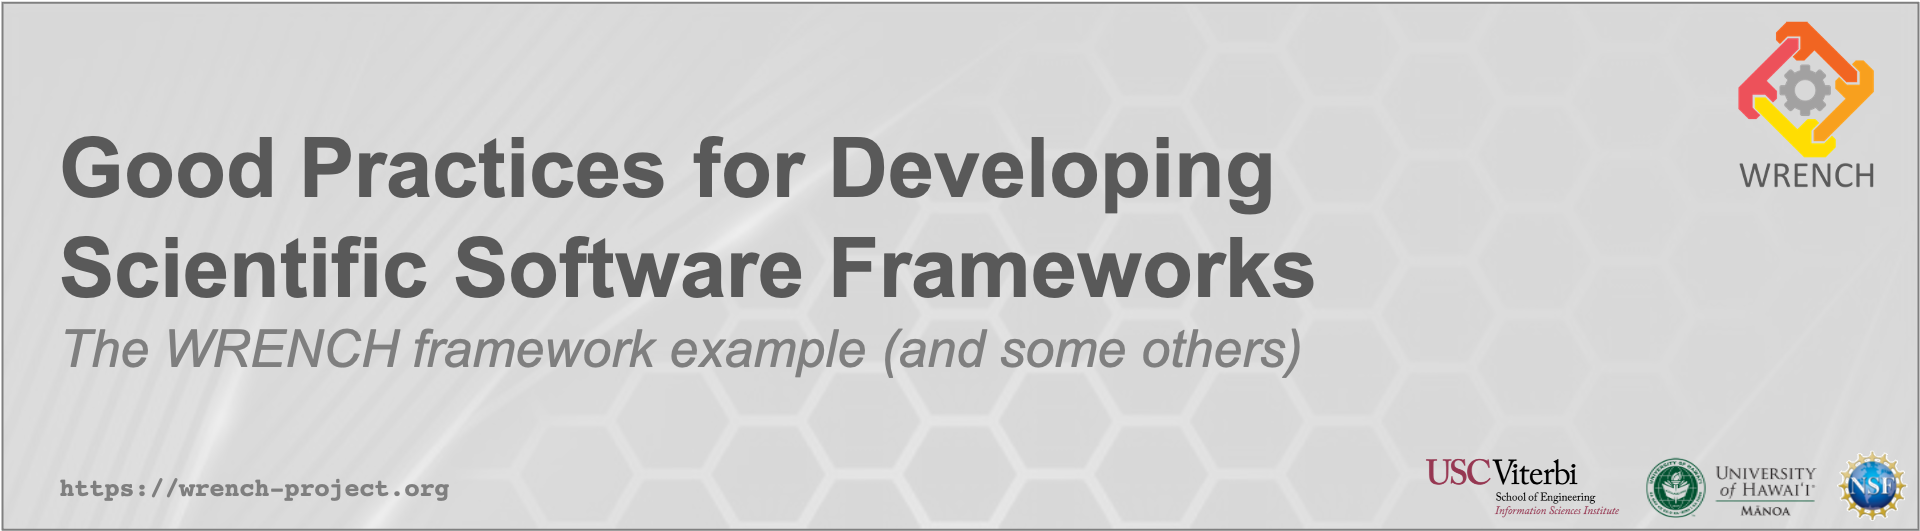 Good Practices for Developing Scientific Software Frameworks: The WRENCH framework example